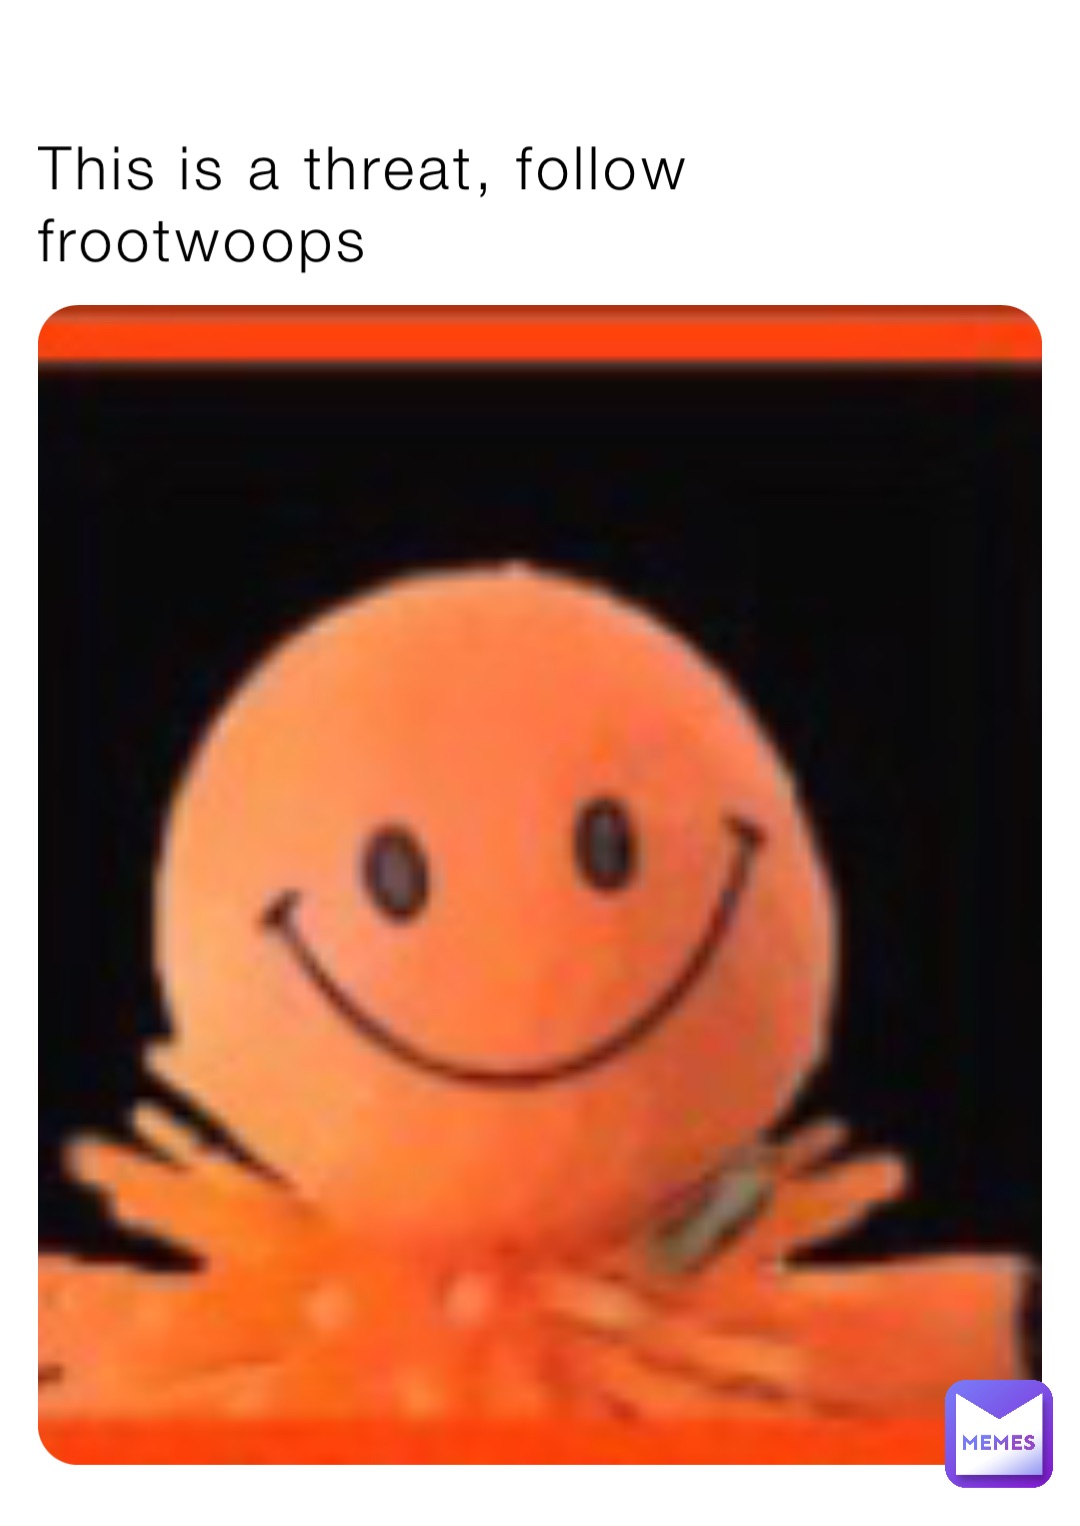 This is a threat, follow frootwoops